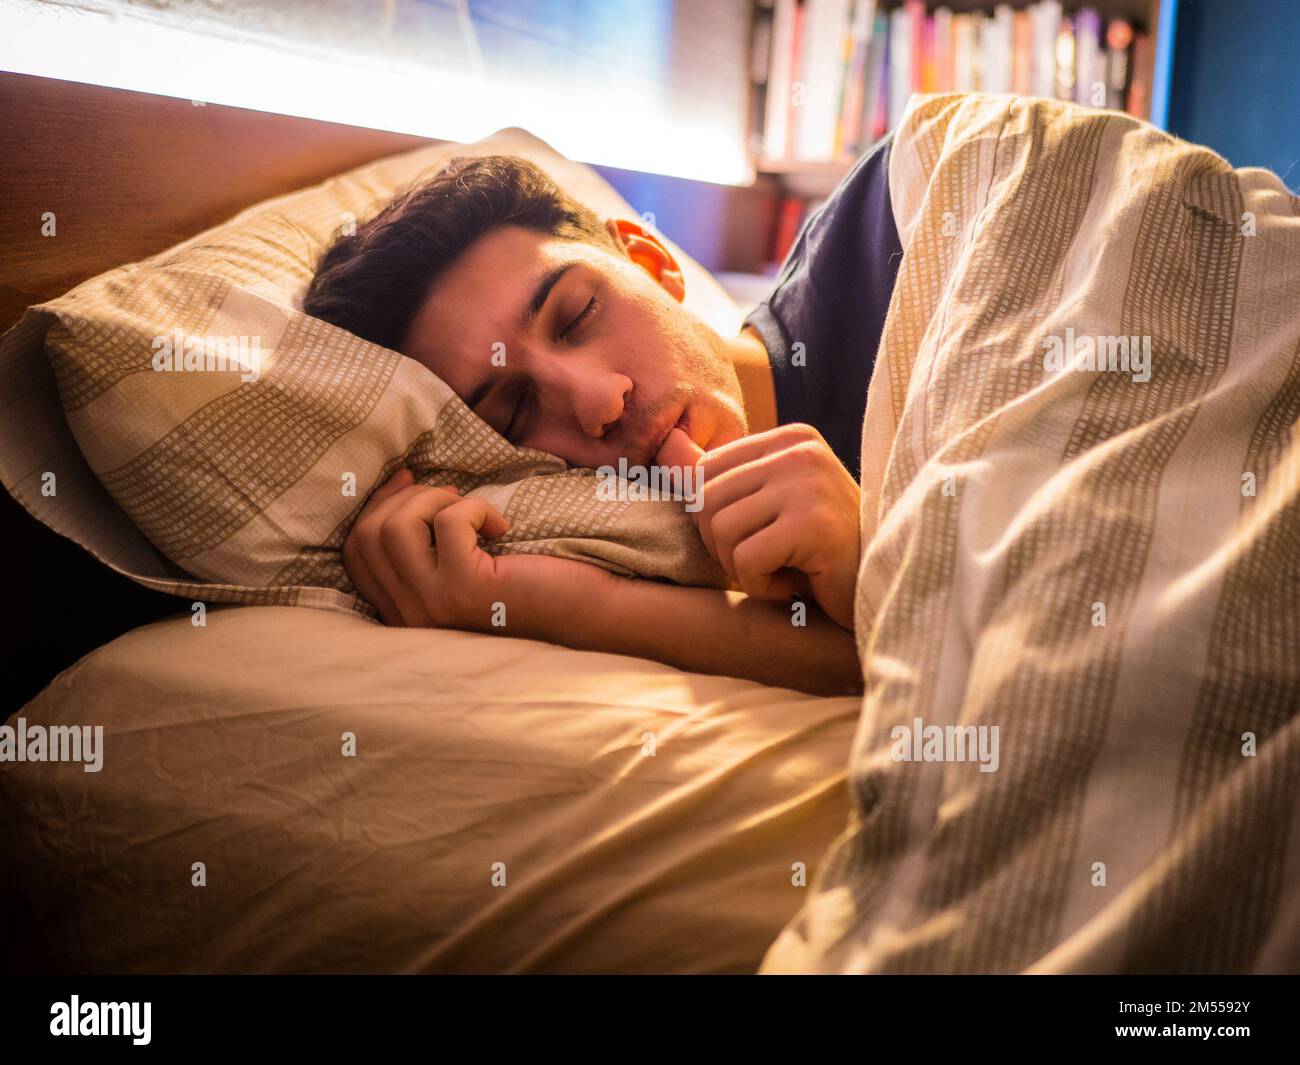 Young man sleeping on bed and sucking finger Stock Photo